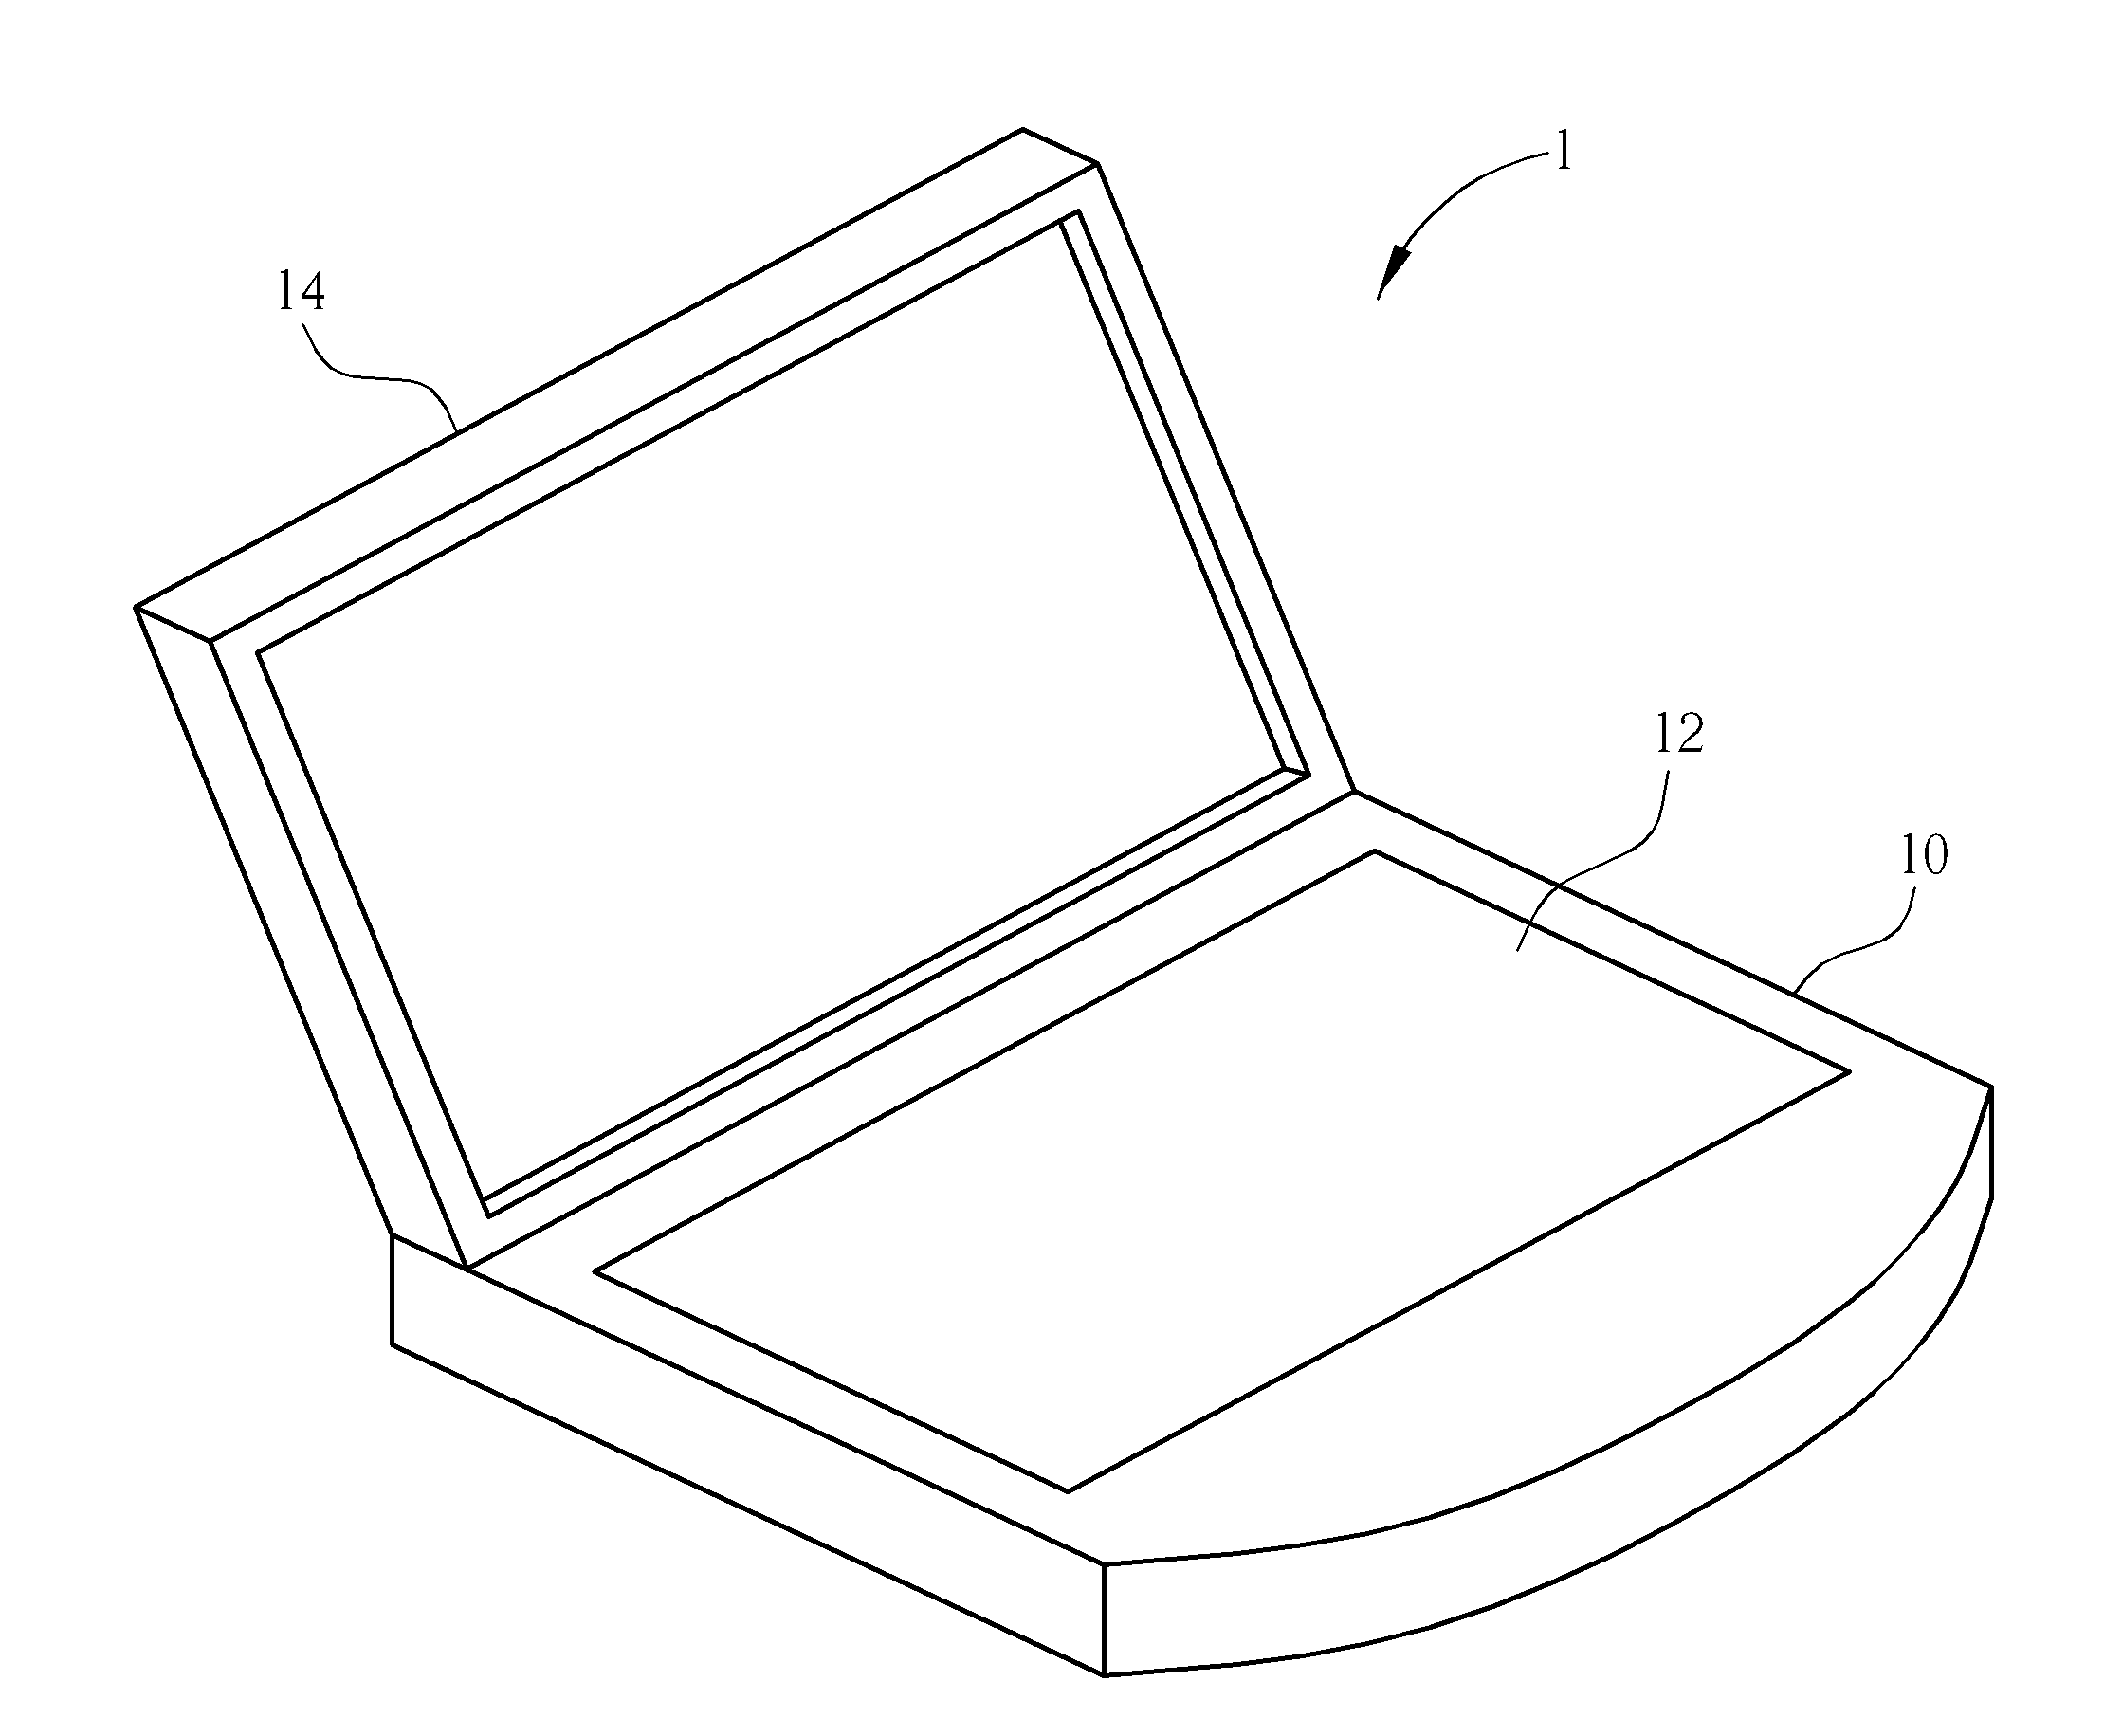 Solar keyboard and electronic device using the same